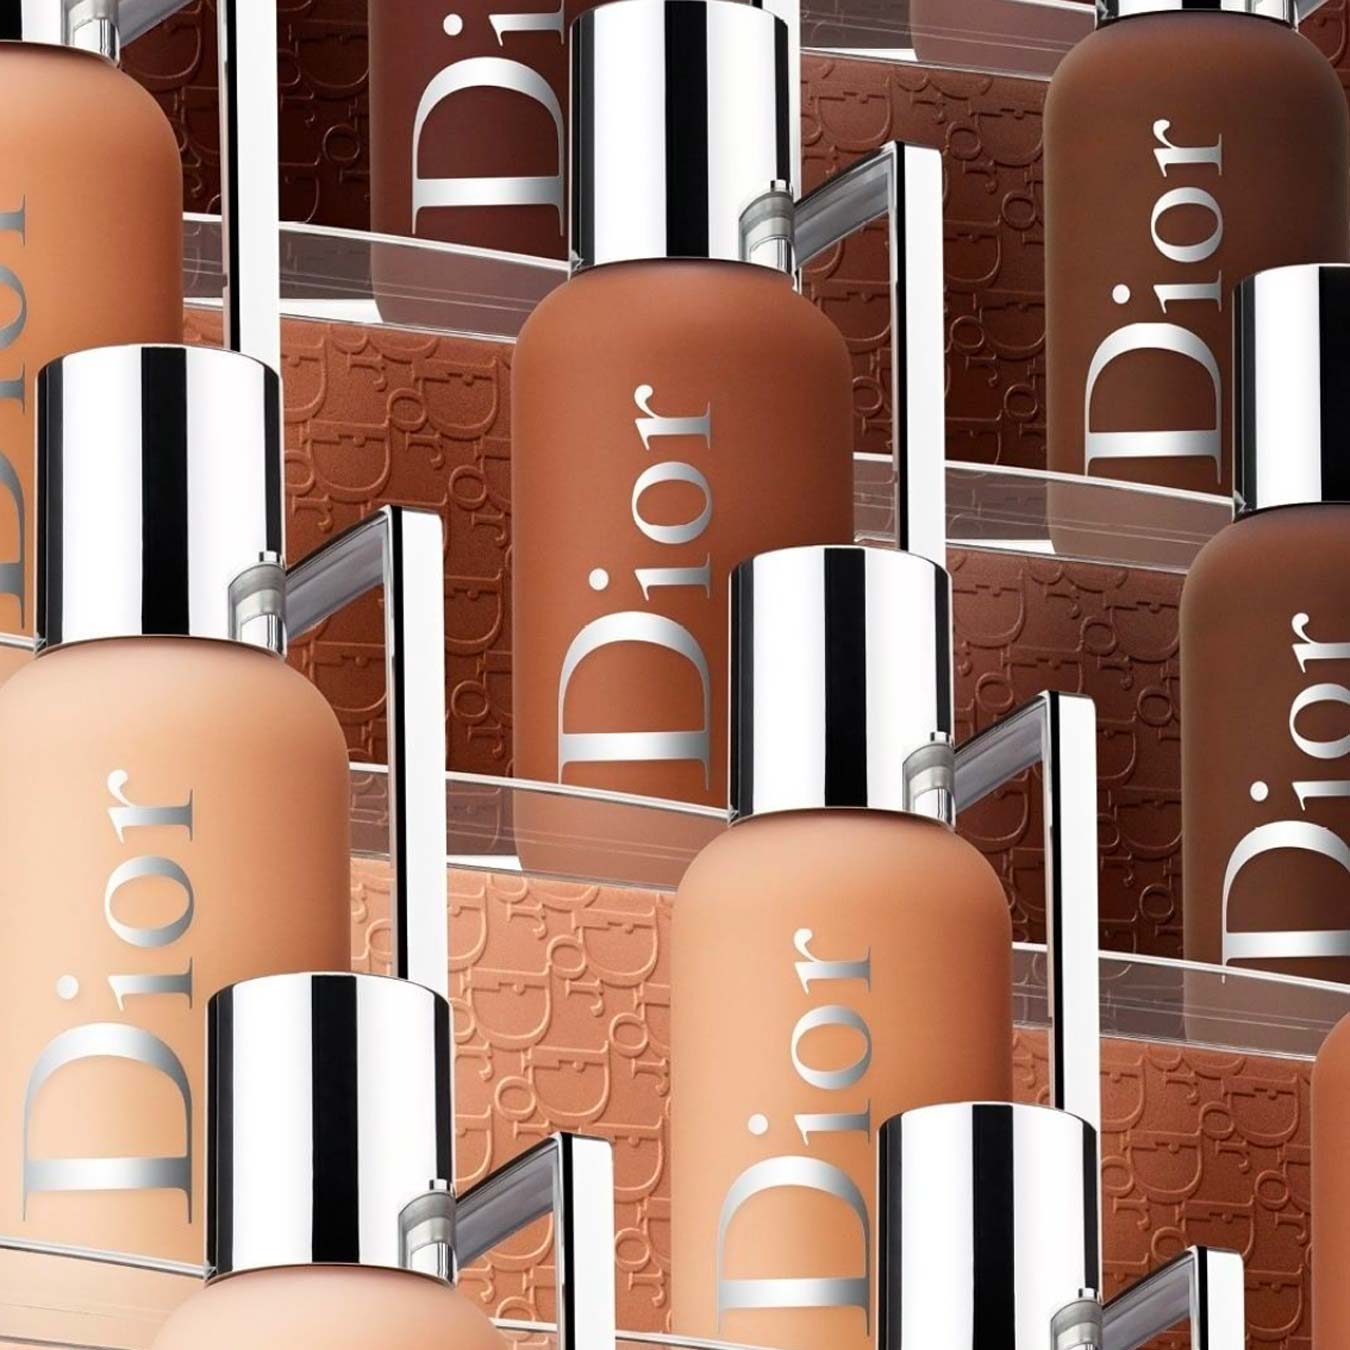 Is Dior Cruelty Free